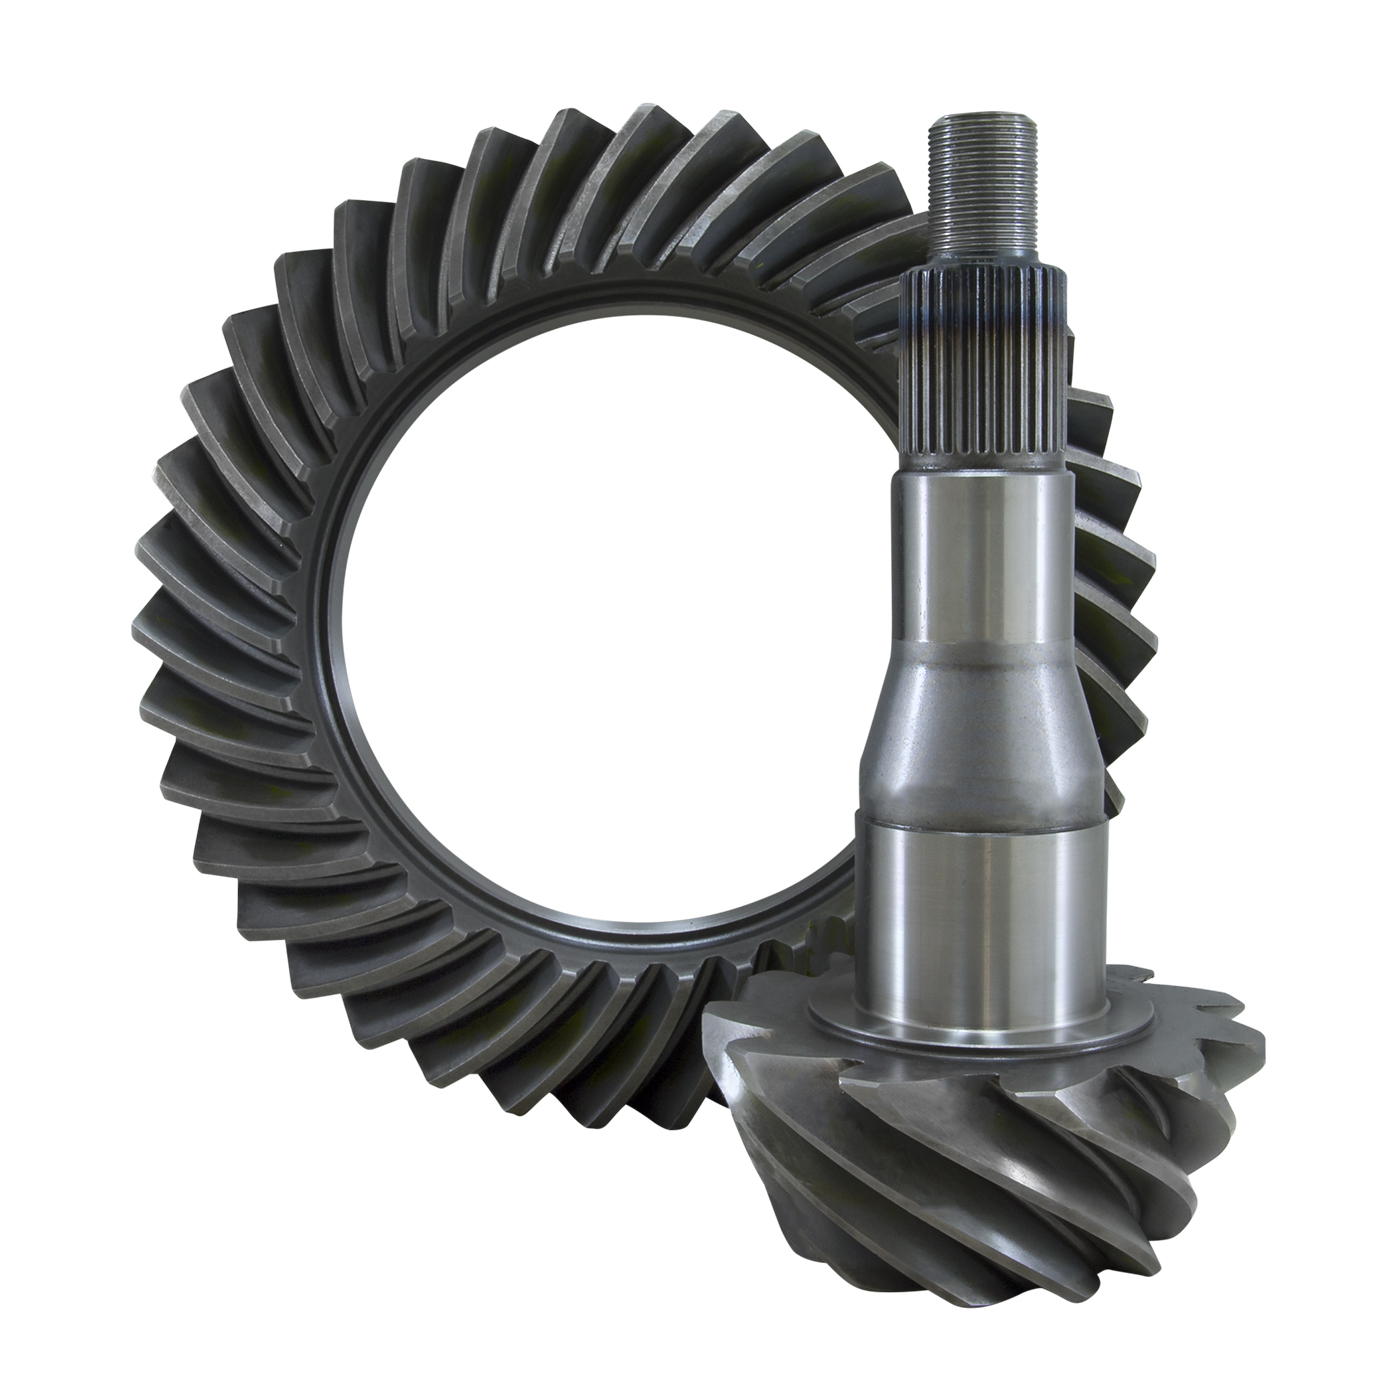 USA Standard Ring & Pinion gear set for '10 & down Ford 9.75" in a 4.11 ratio